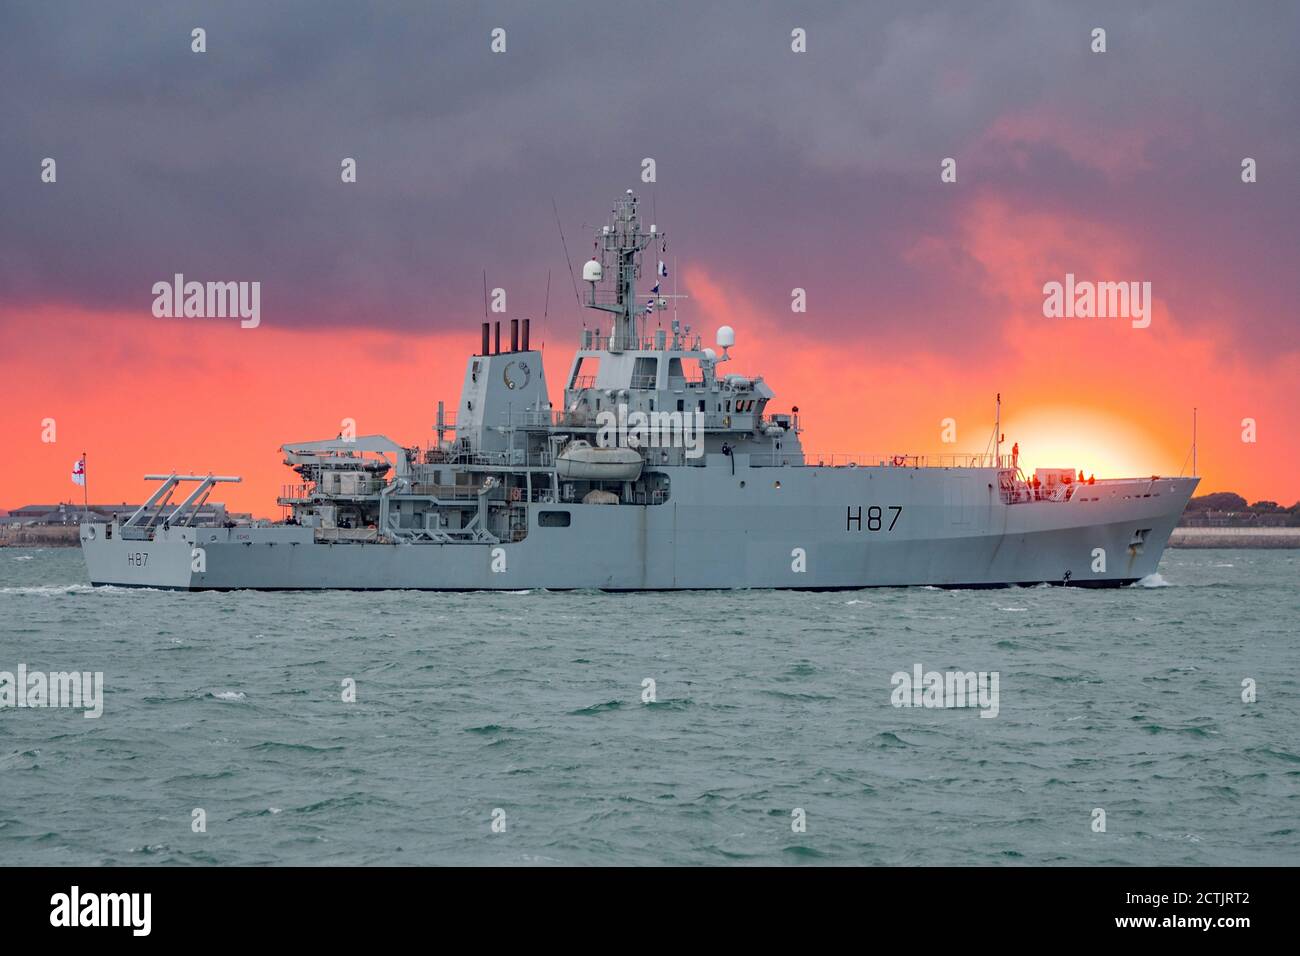 The Royal Navy survey ship HMS Echo (H87) arriving at Portsmouth, UK on the  23rd September 2020 with a dramatic golden hour sunset in the background  Stock Photo - Alamy